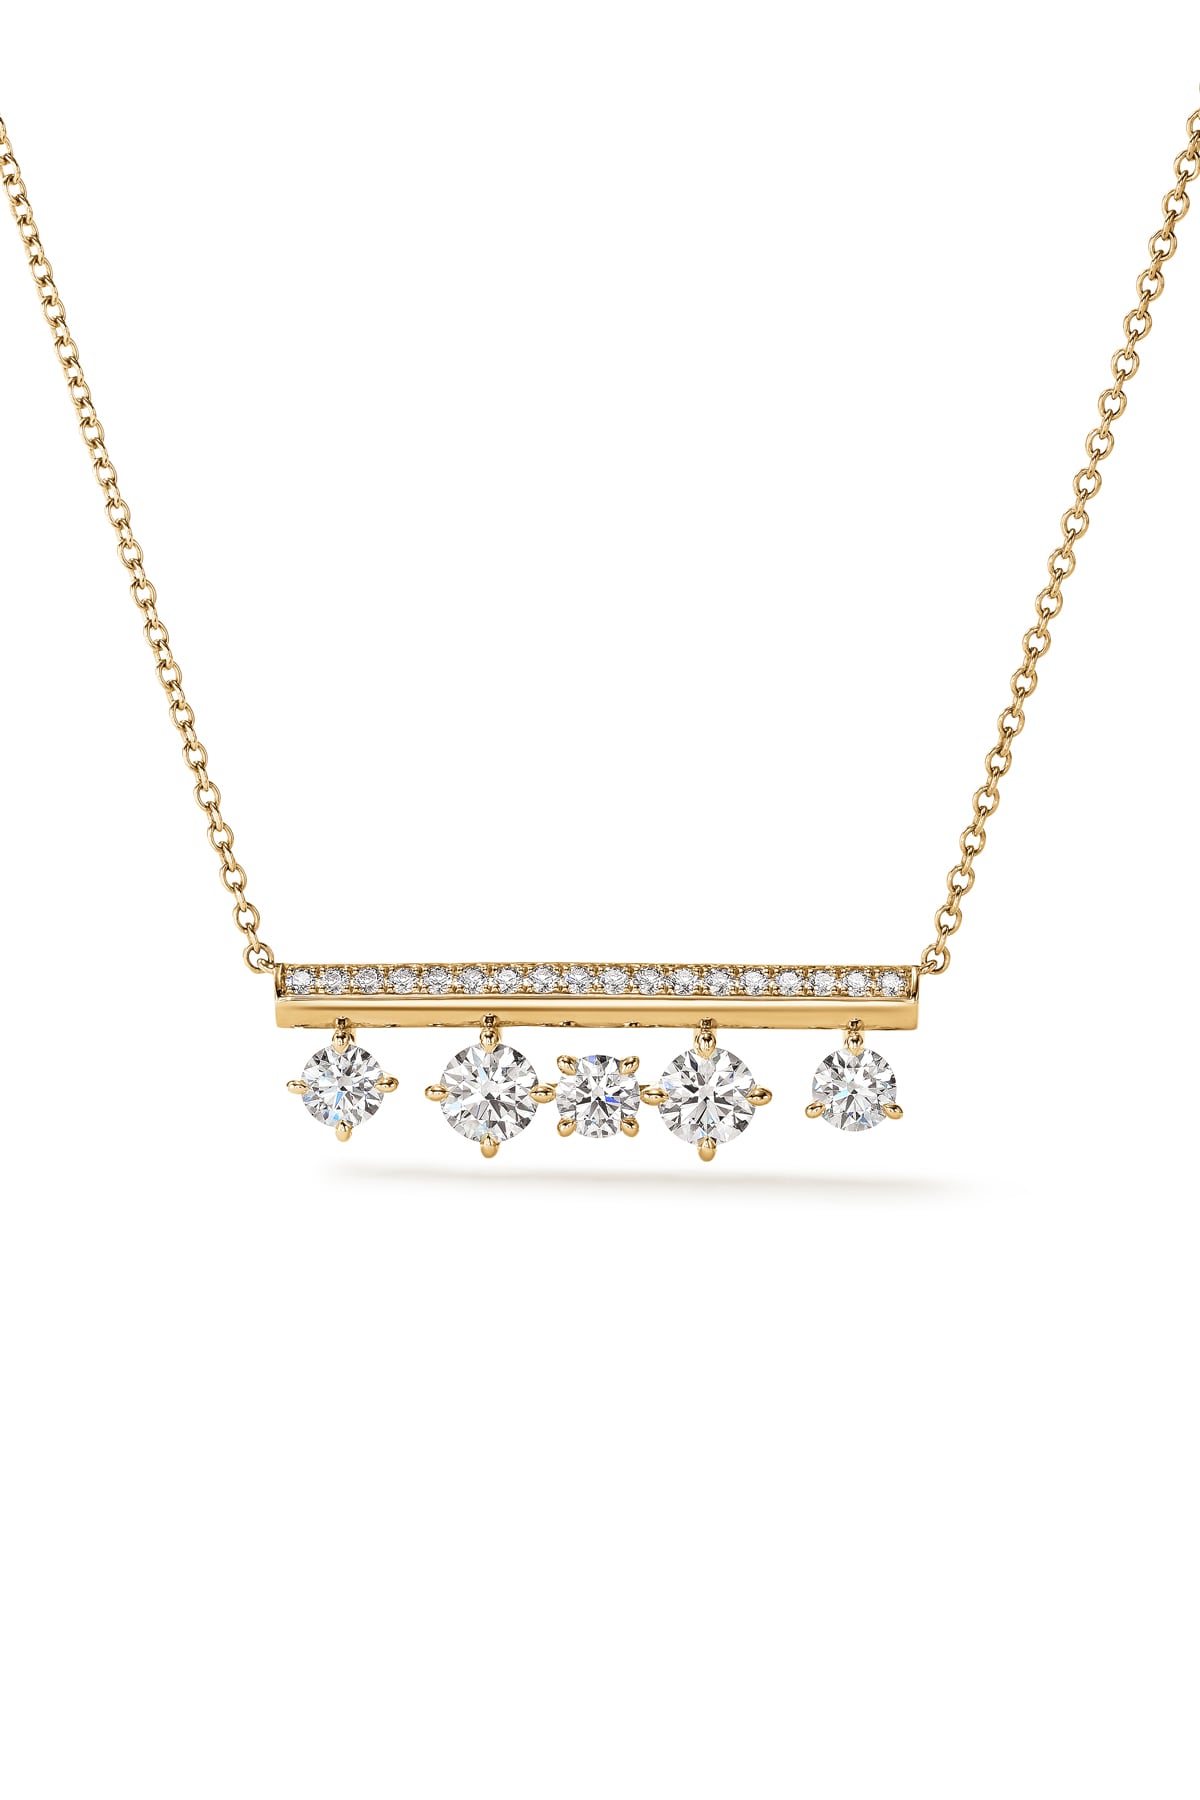 Barre Floating Diamond Pave Pendant Necklace from Hearts On Fire from LeGassick Jewellery Gold Coast, Australia.